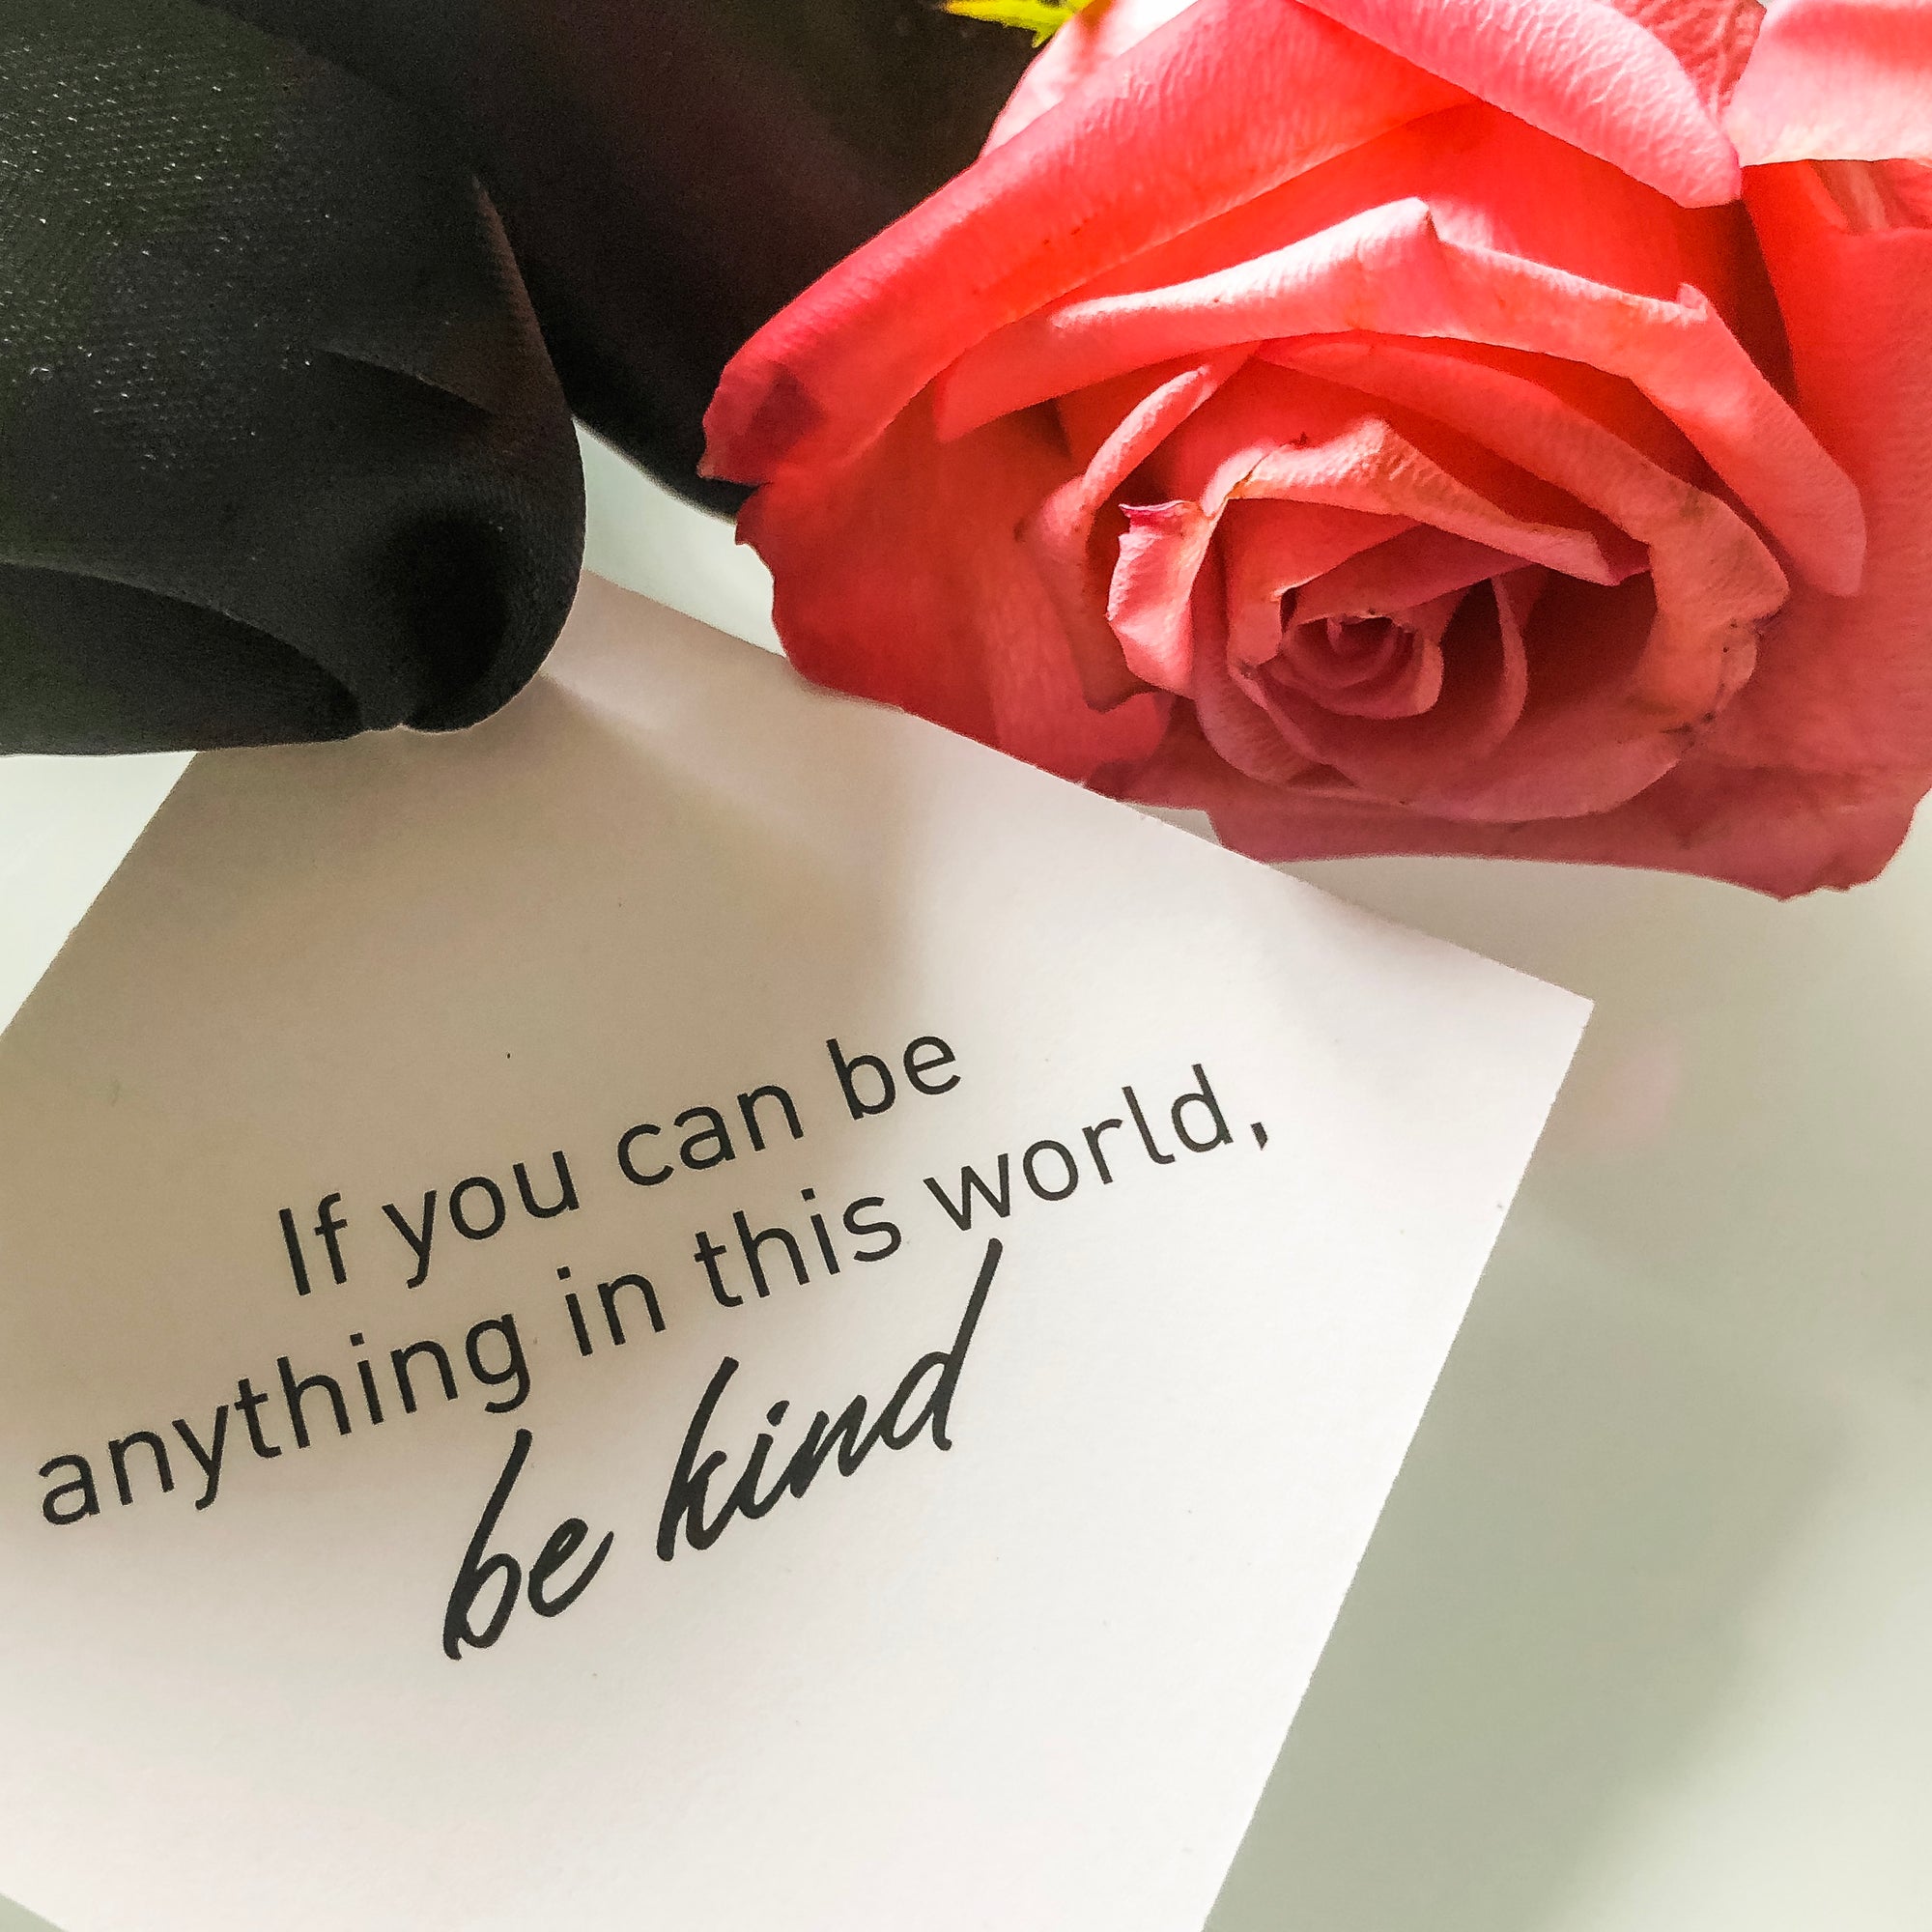 If you can be anything in this world, be kind. We've got gifts for all occasions. 